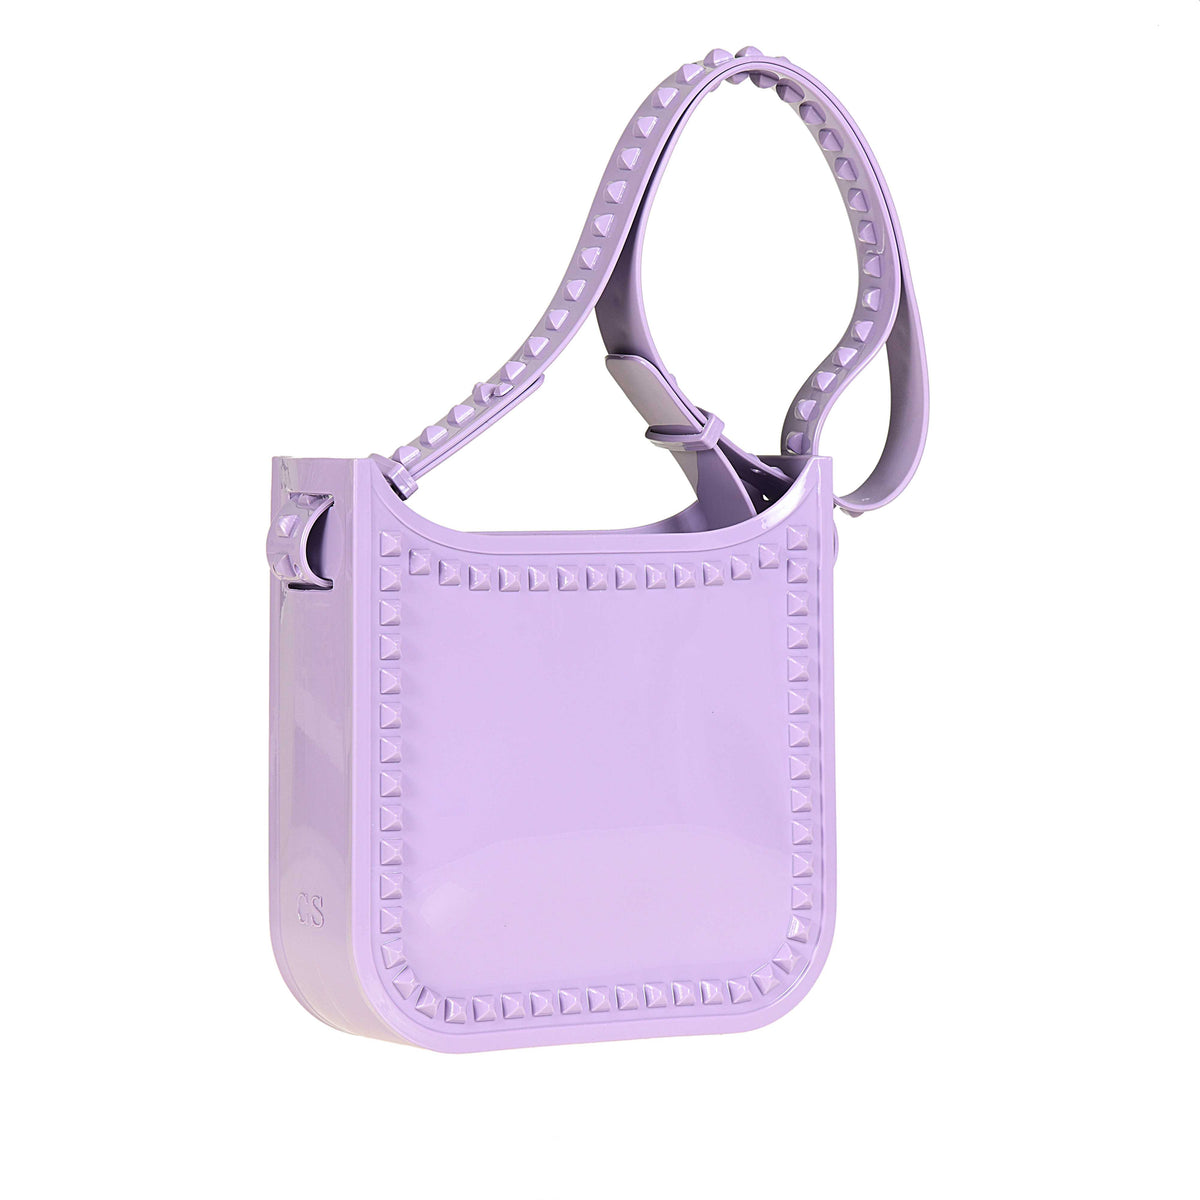 Recyclable Toni jelly studded purse in color violet 